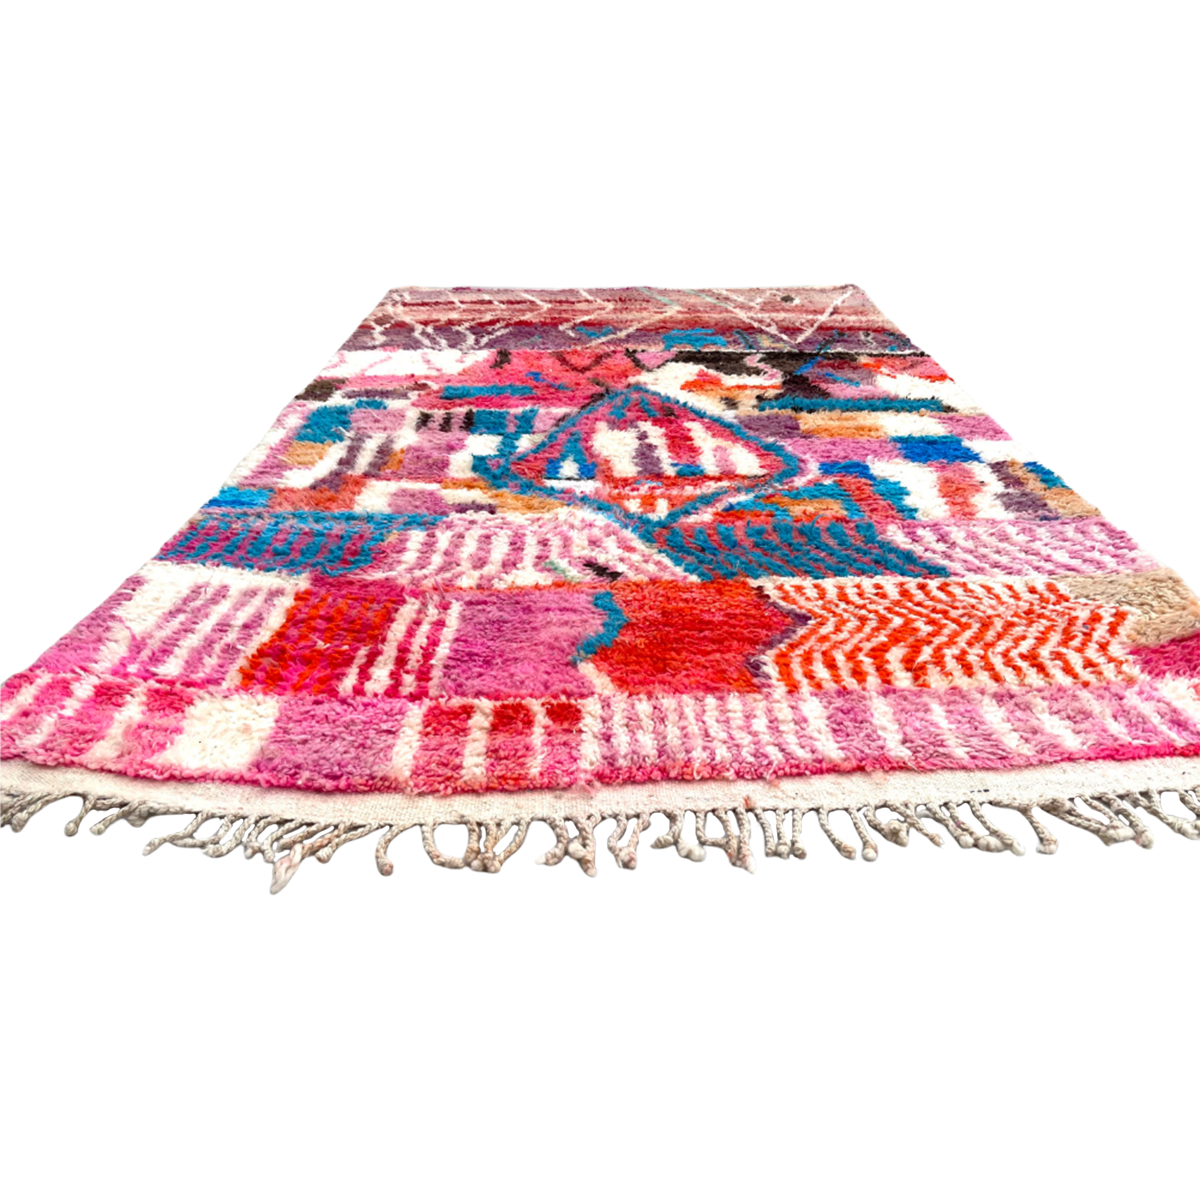 Good Price For Moroccan Rugs